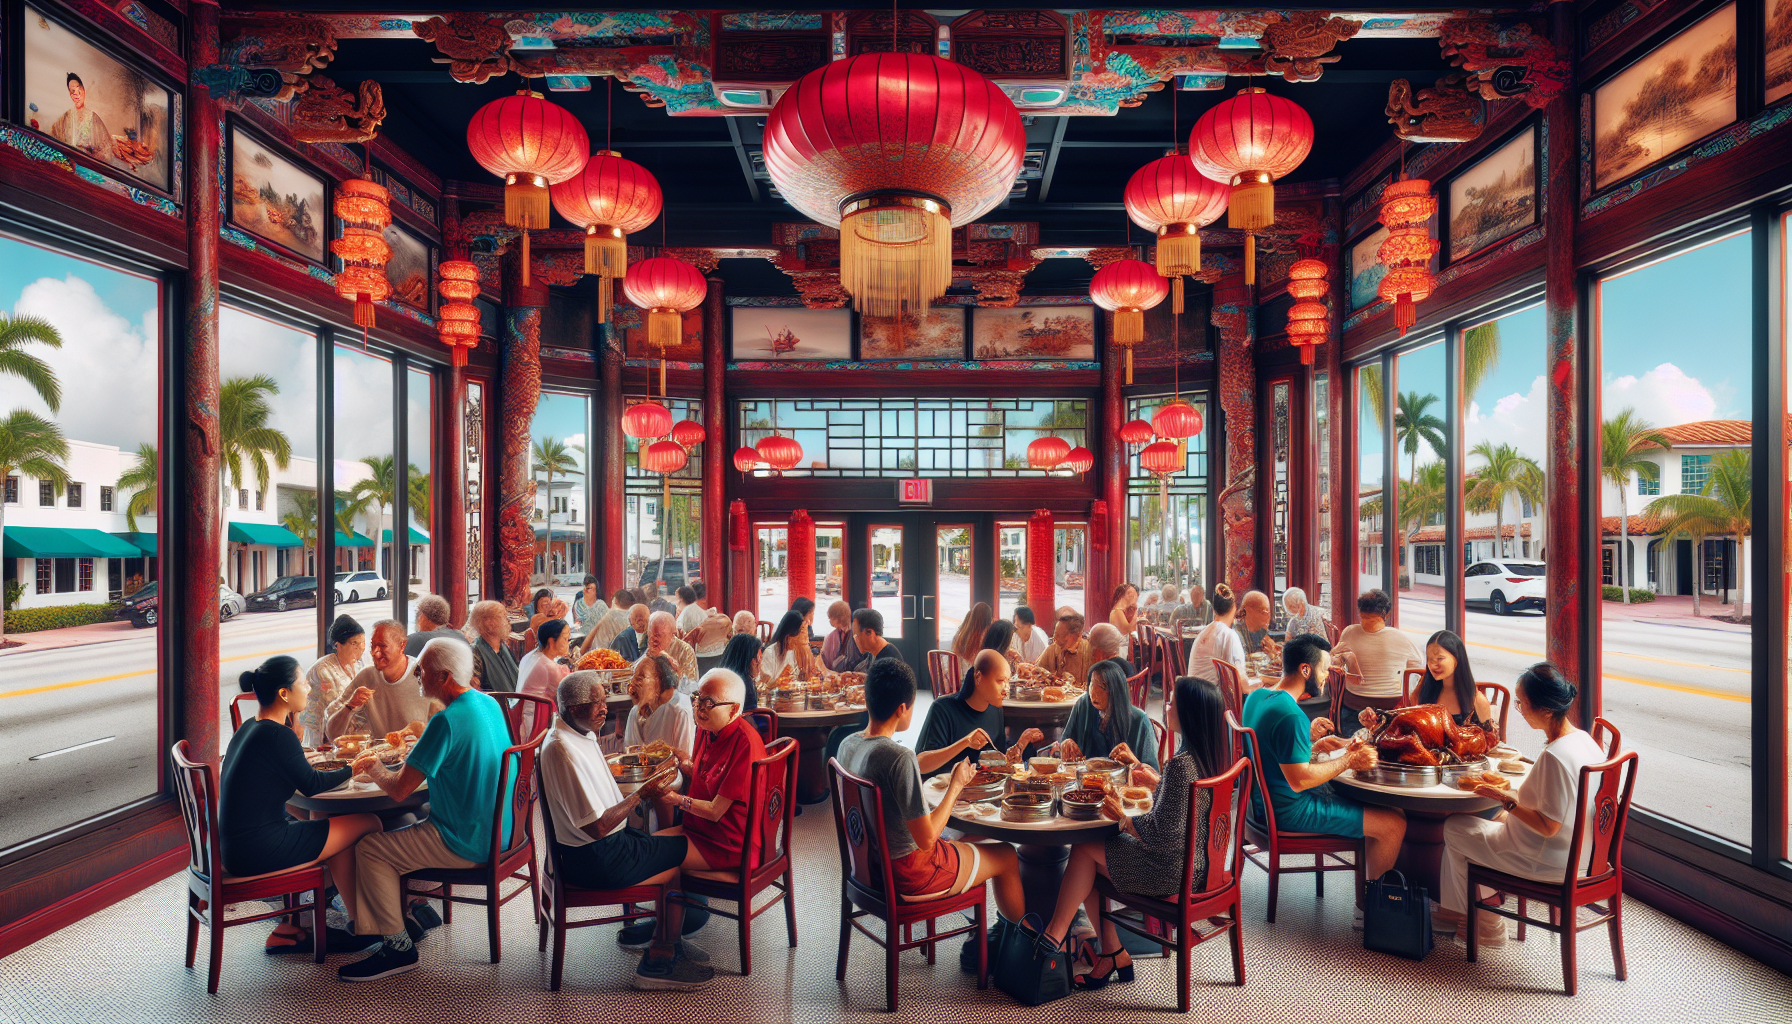 A vibrant Chinese restaurant in Fort Lauderdale